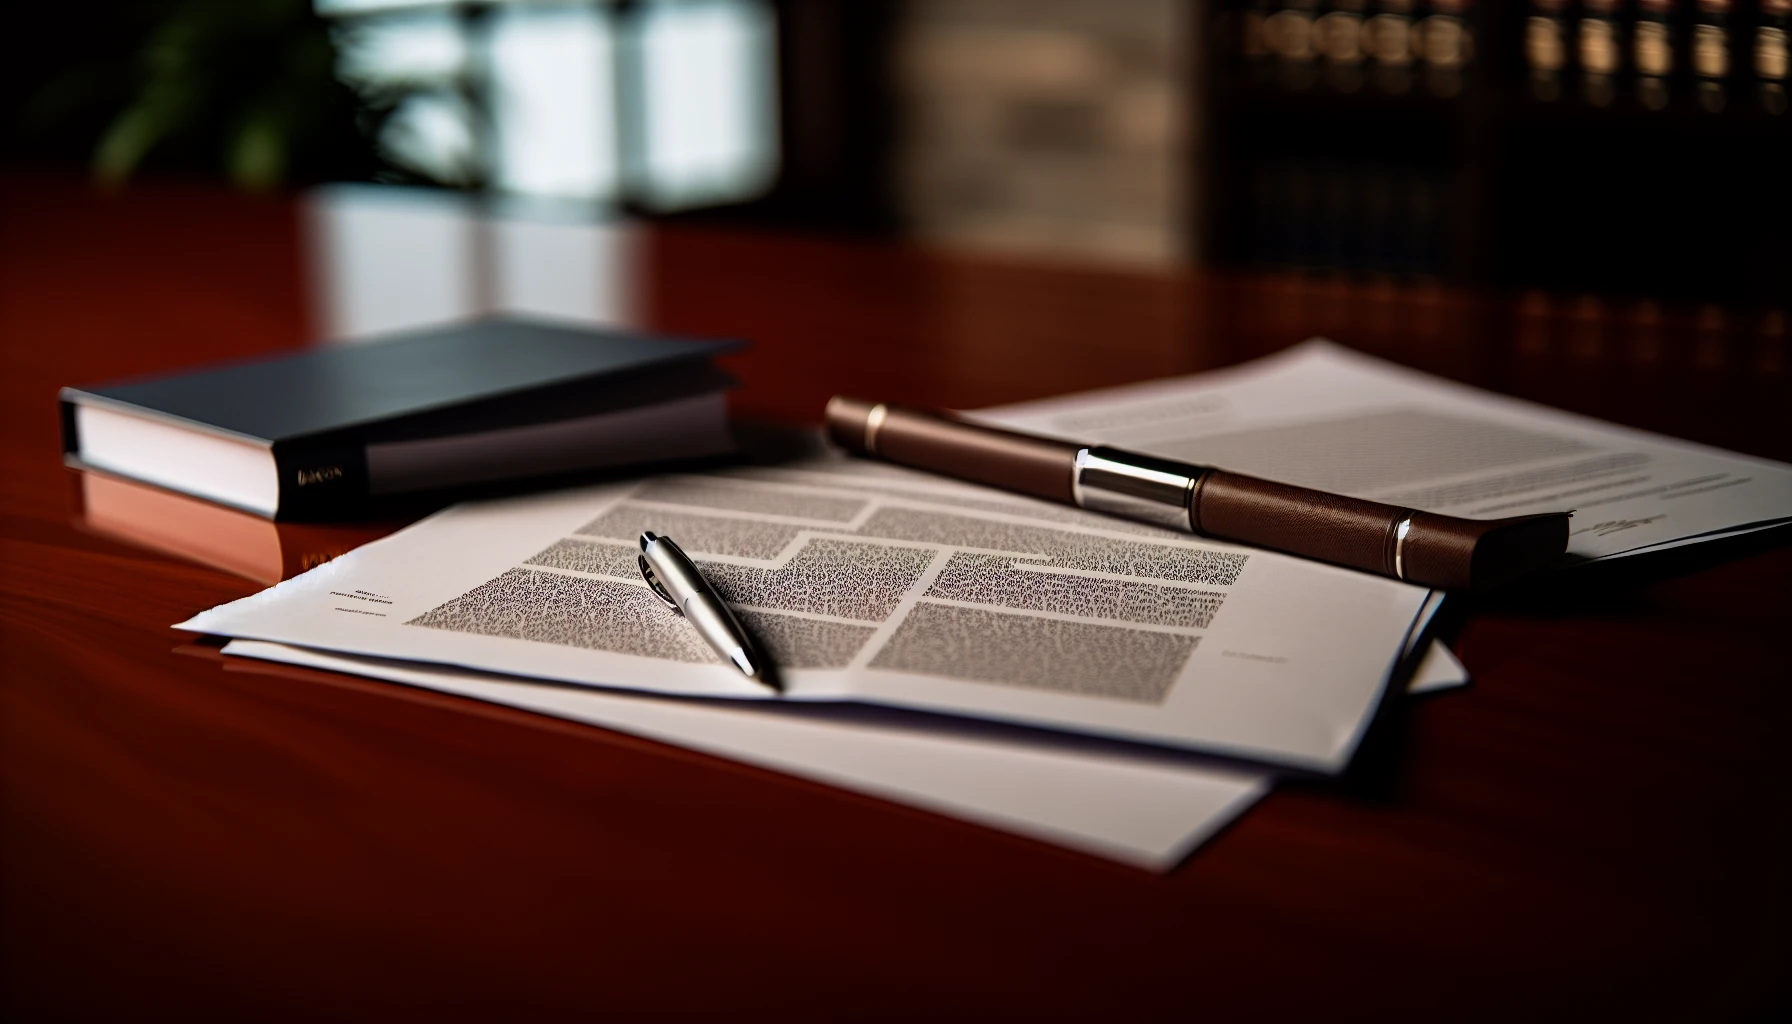 Photo of legal documents and a pen on a desk